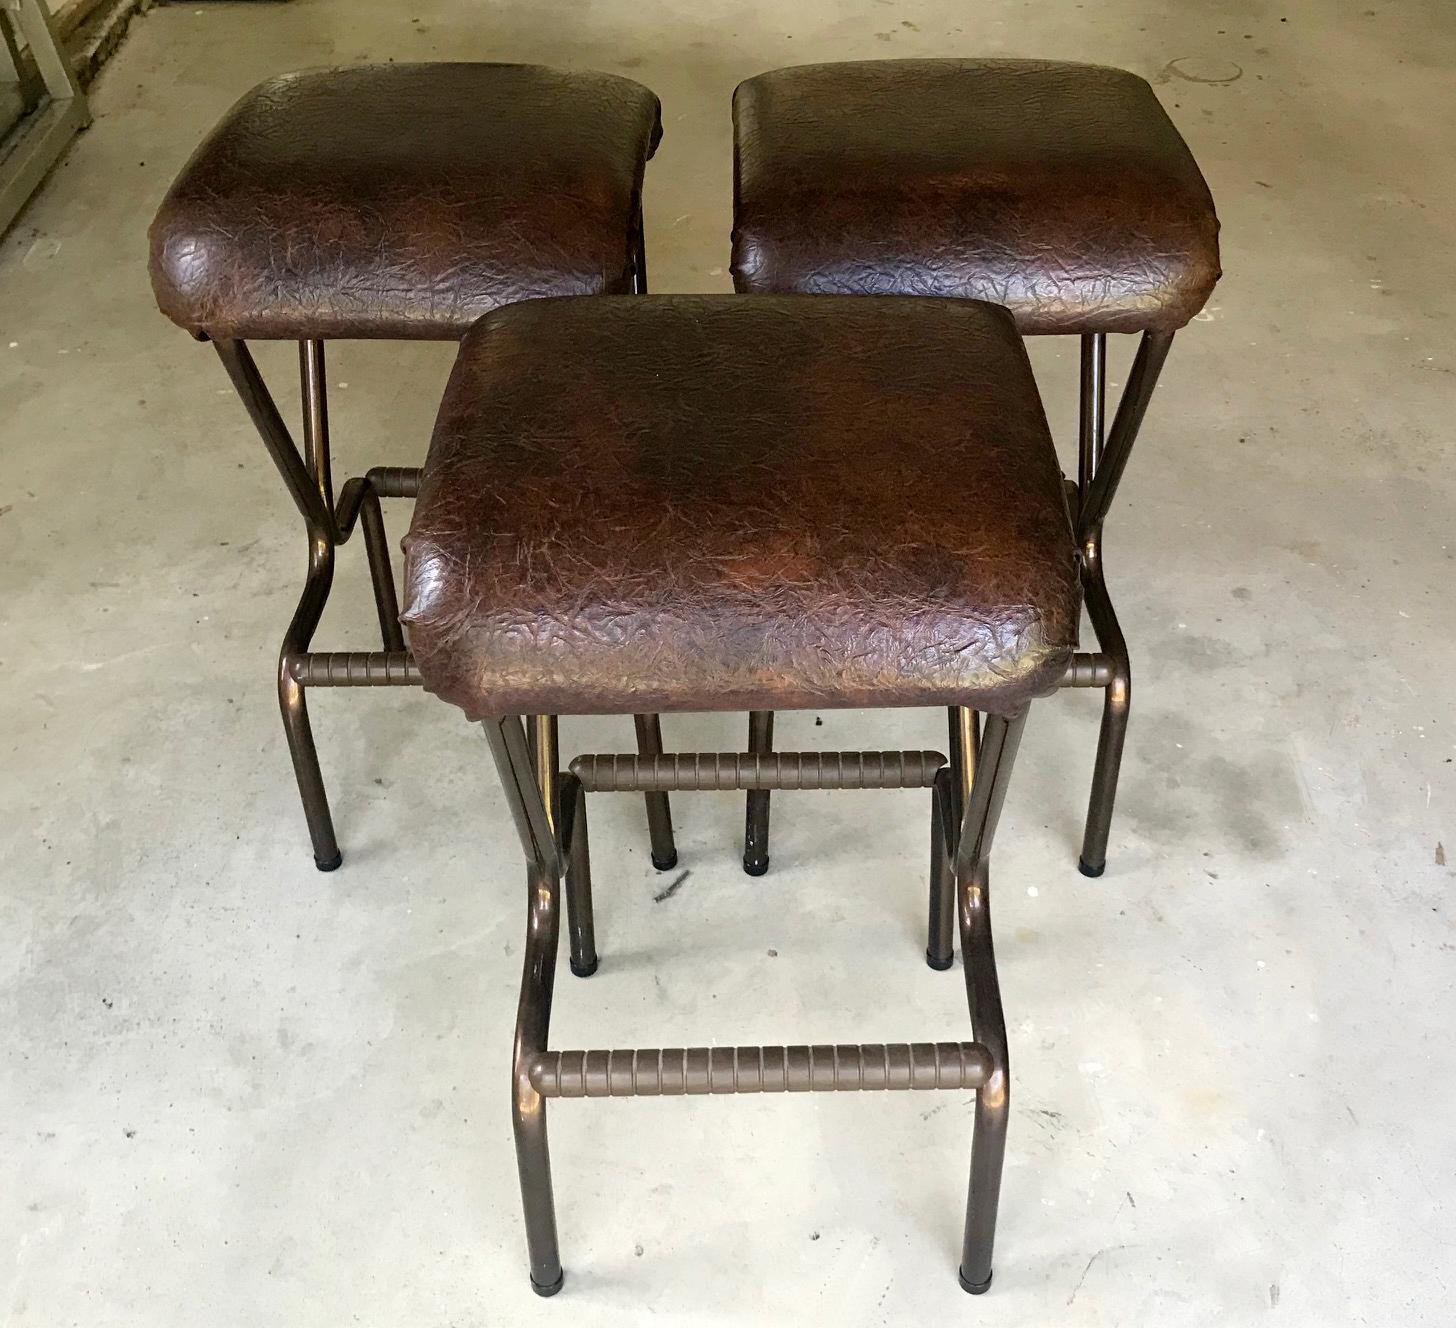 This set of bar stools were made by Daystrom, USA, circa 1960s. Tubular metal frame construction with padded seat covered in textured Naugahyde and footrests on both side. Original labels underneath. Great for period interior with an Industrial chic